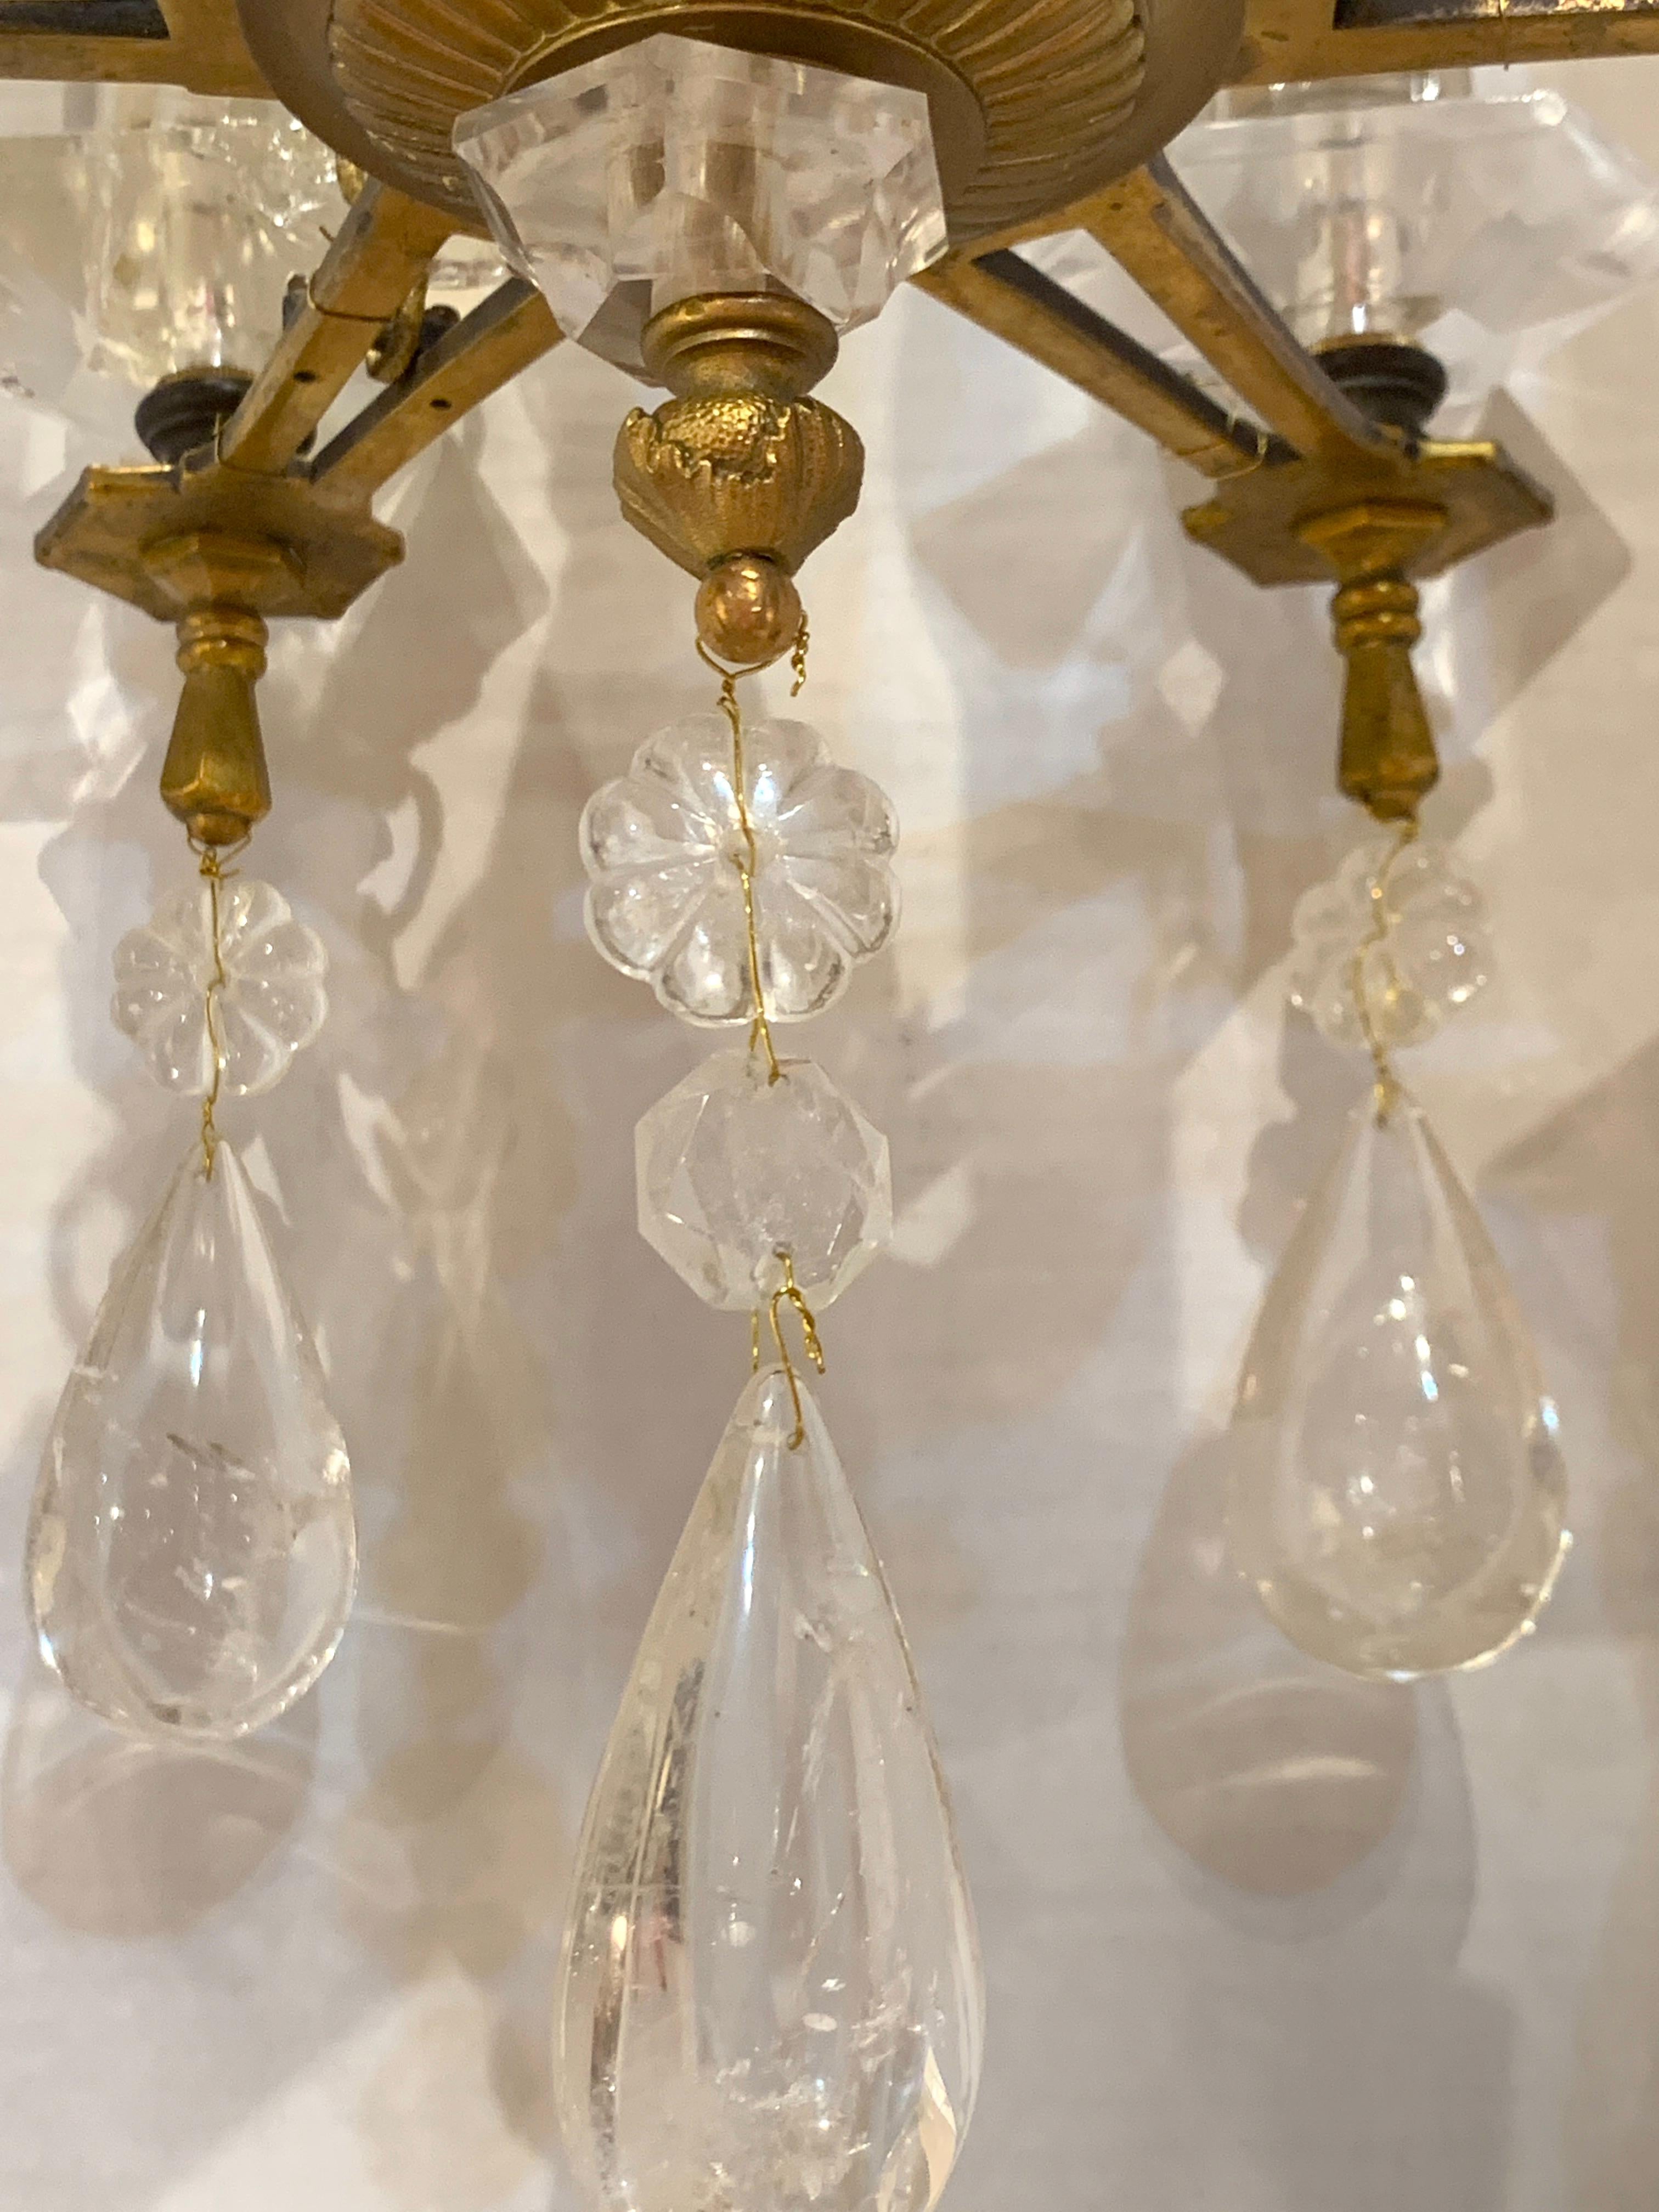 Carved Exquisite All Rock Crystal and Gilt Bronze Six-Light Boudoir Chandelier For Sale